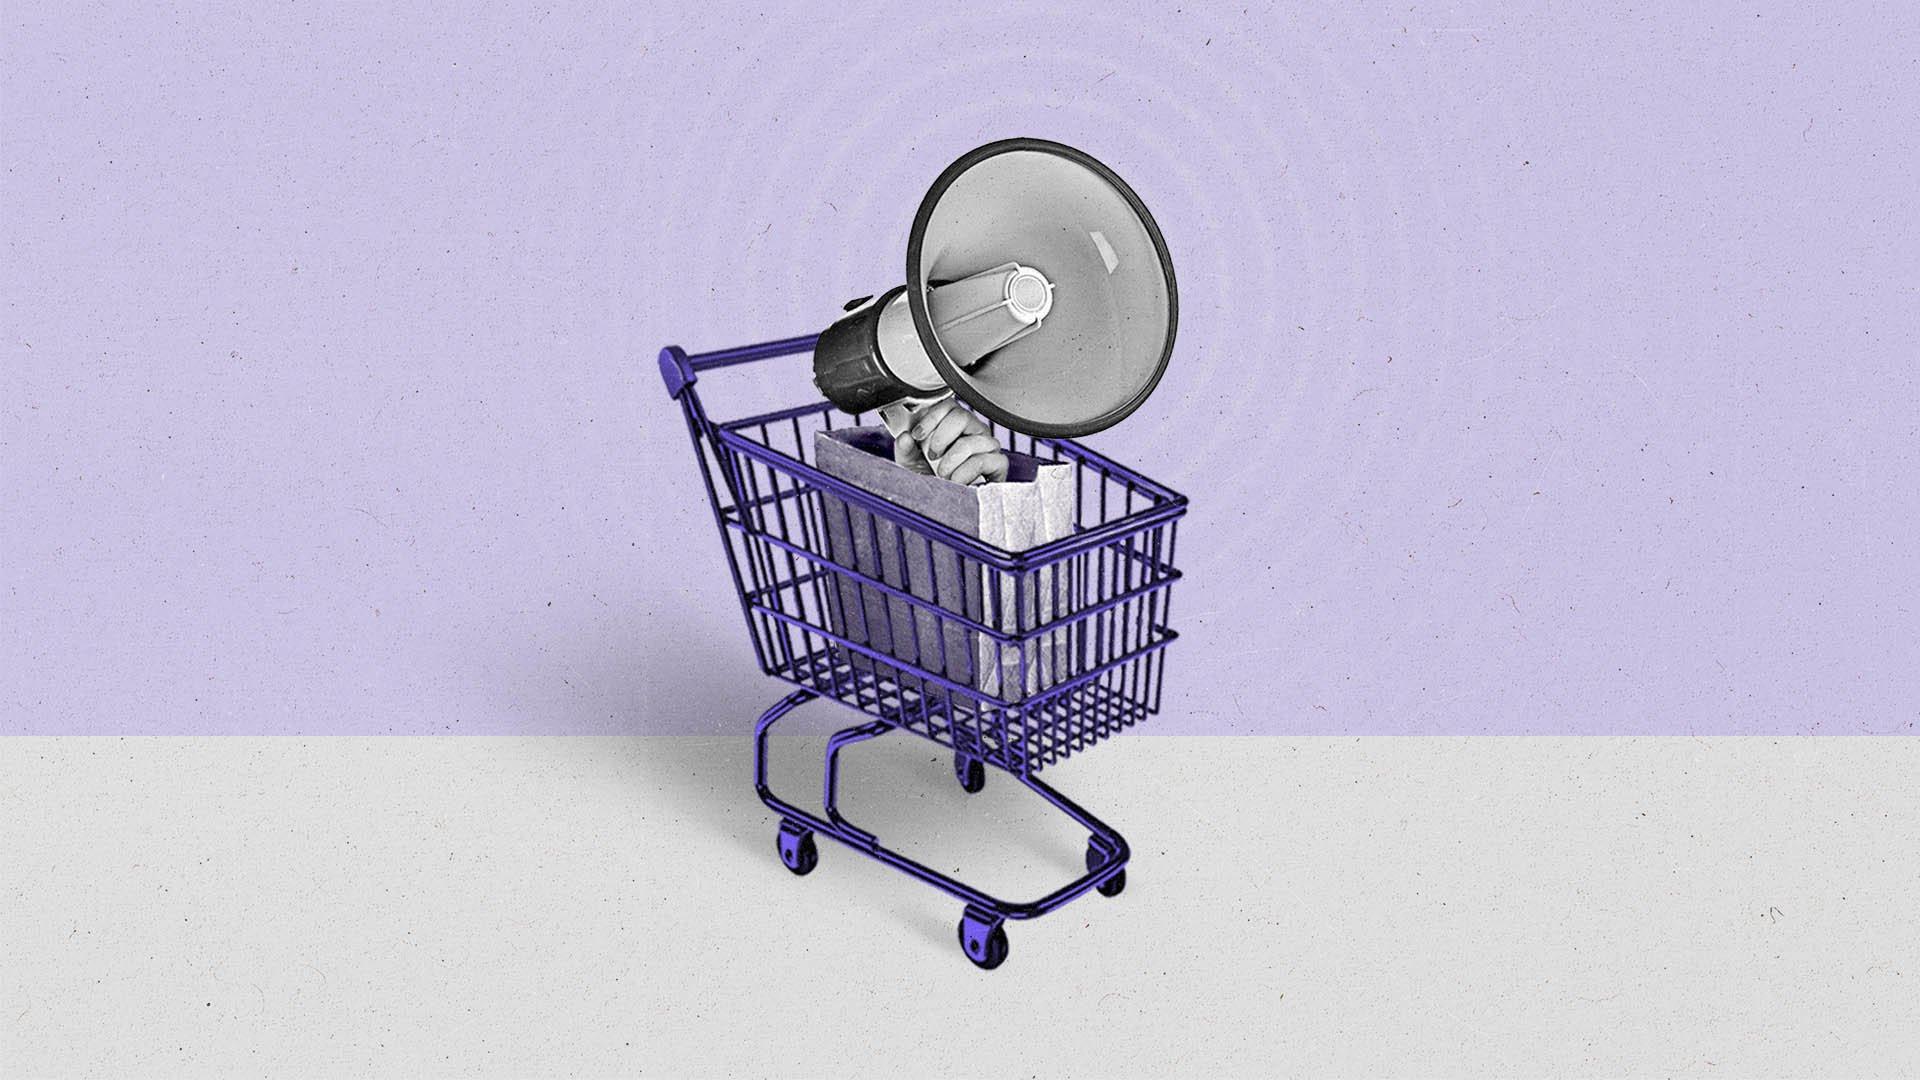 A hand holding a megaphone emerges from a paper bag within a purple shopping cart.